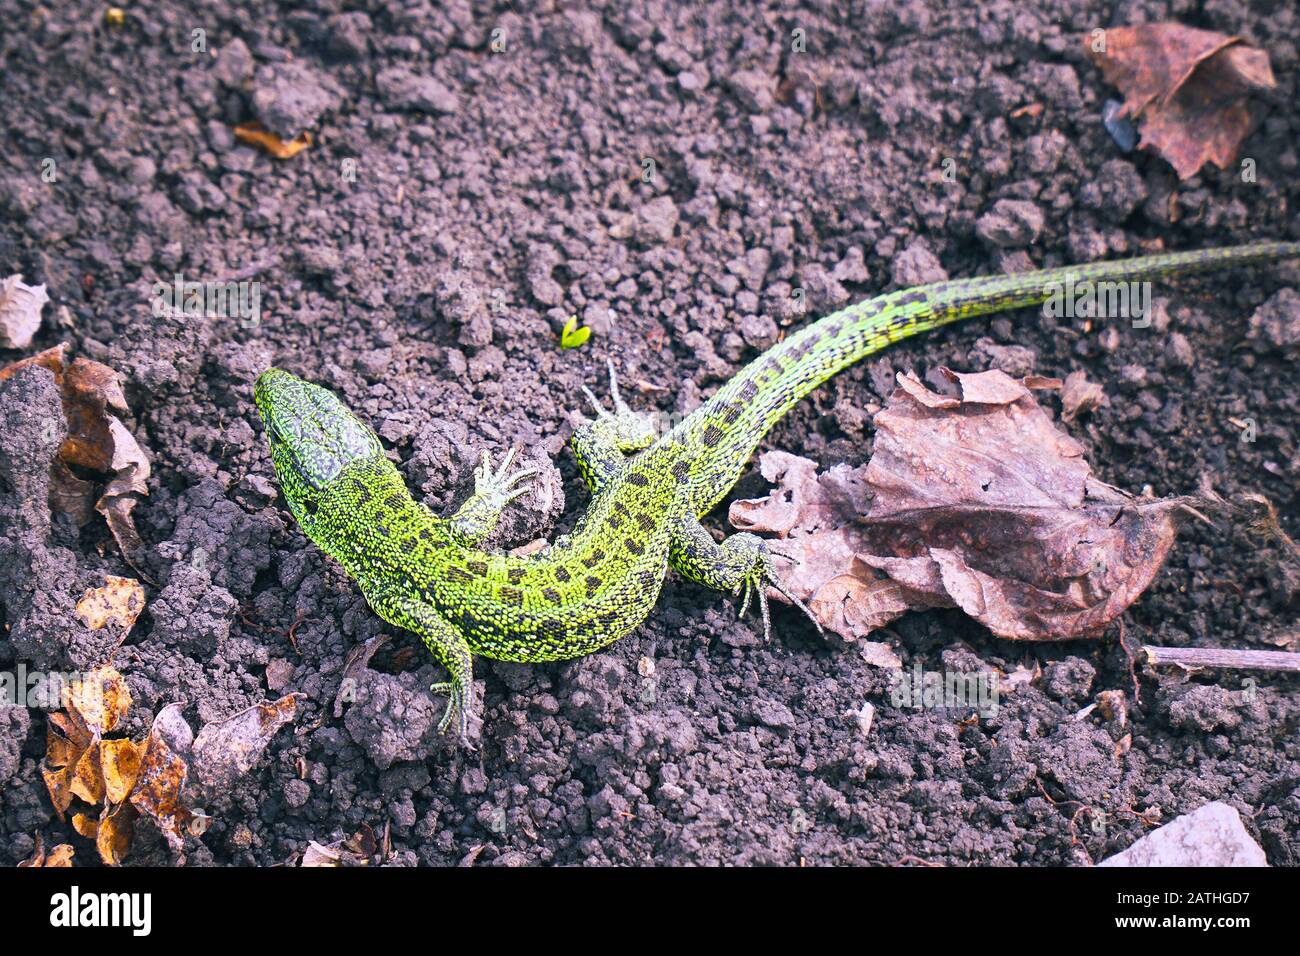 A small green lizard on the ground. Selective focus Stock Photo